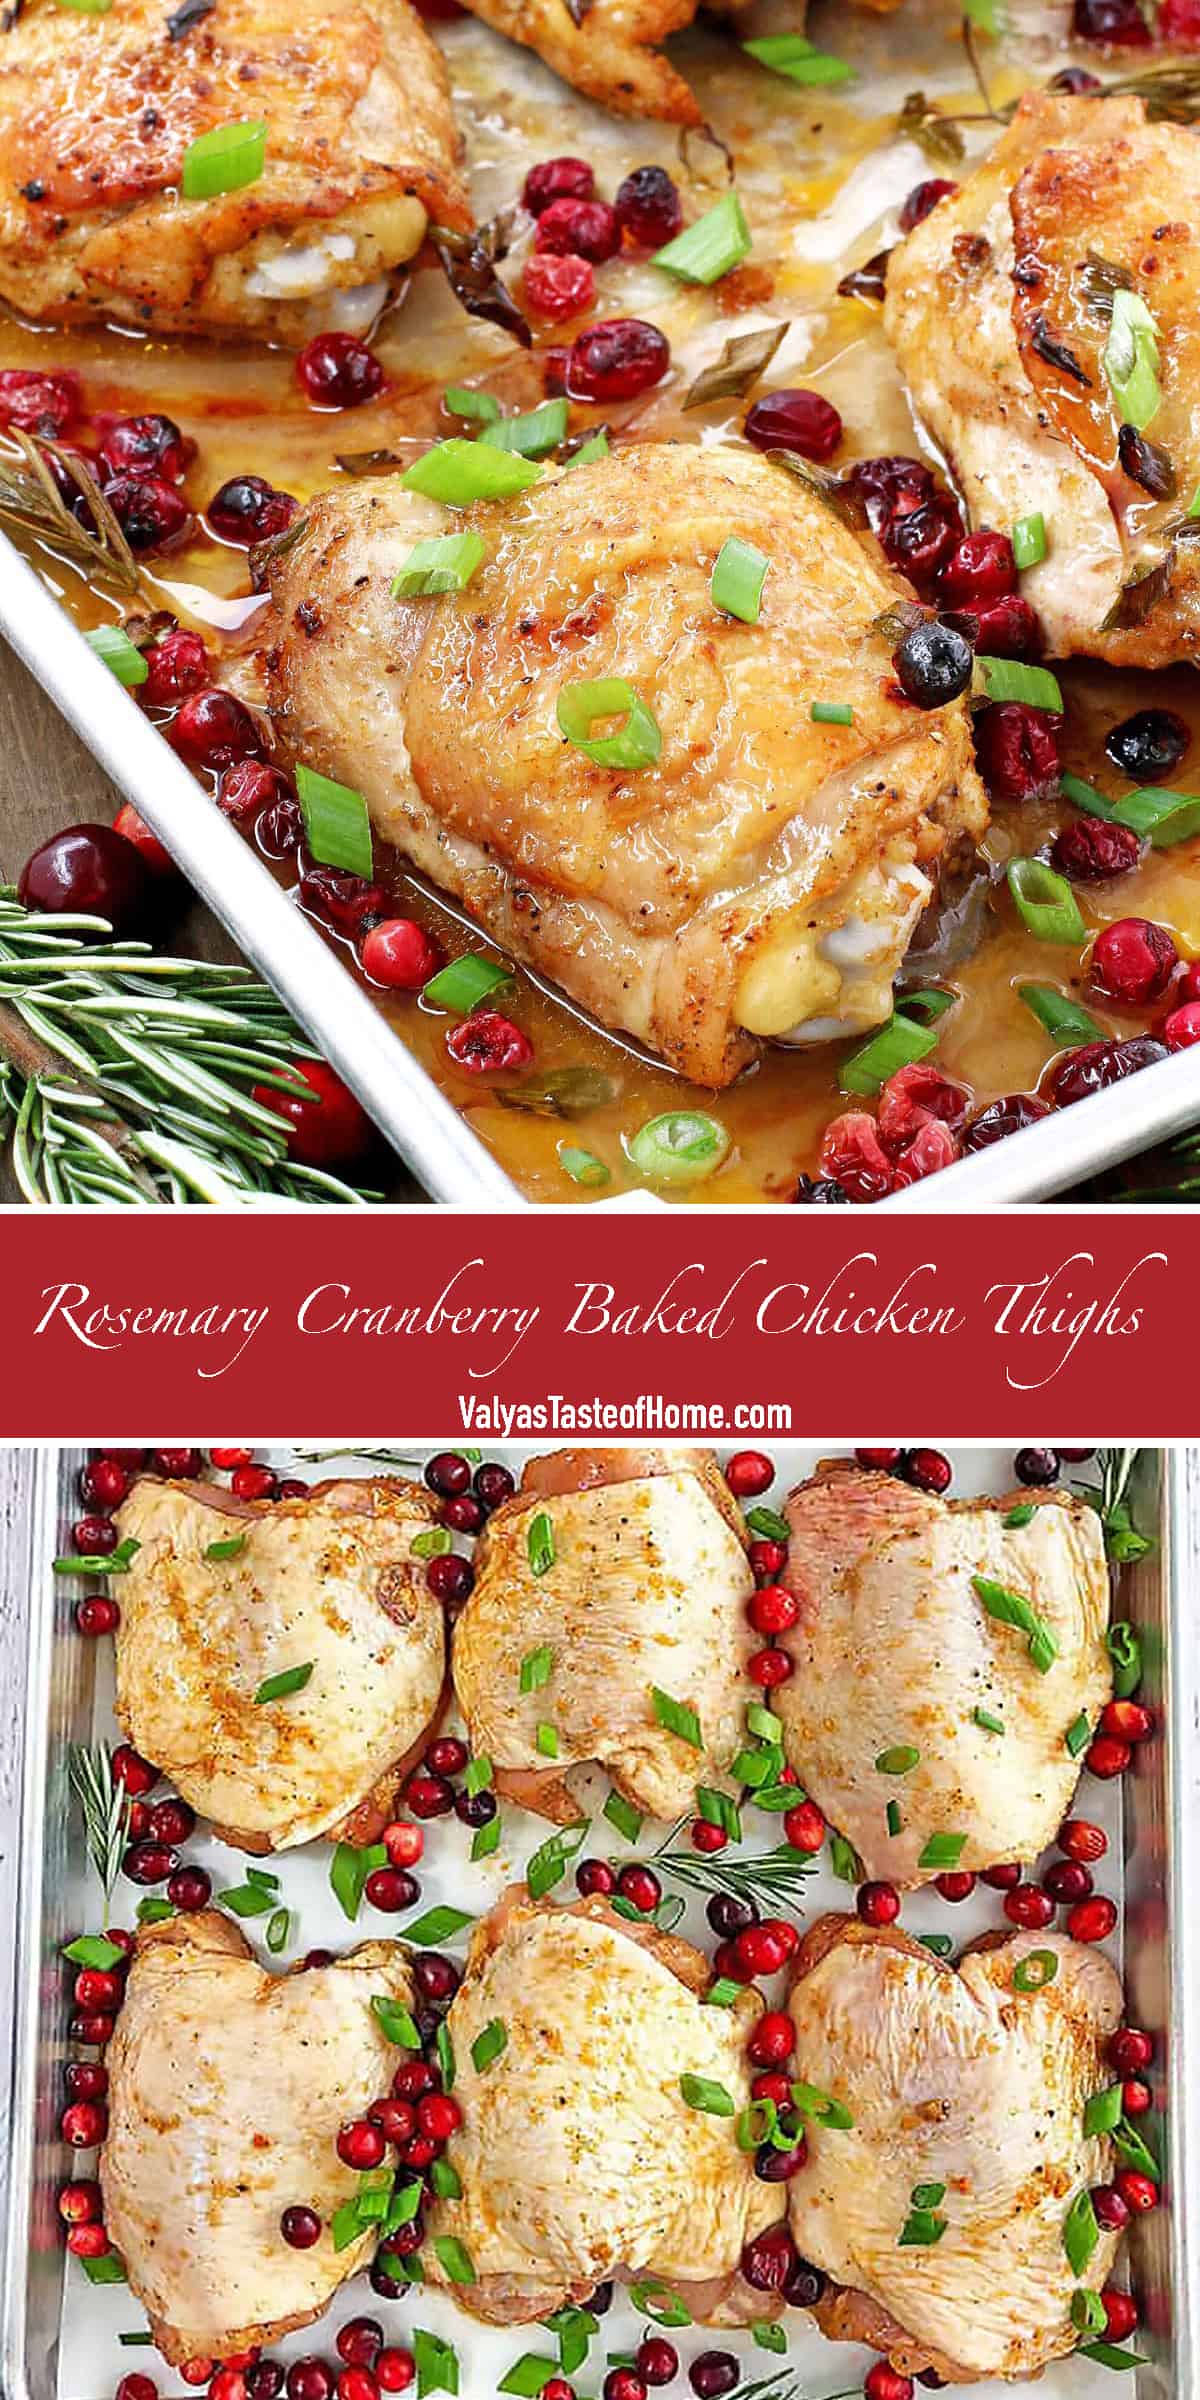 Rosemary Cranberry Baked Chicken Thighs Recipe This Rosemary Cranberry Baked Chicken Thighs recipe is the perfect addition to your holiday table that satisfies that craving, as well as adds to the holiday’s feel. The chicken thighs are super juicy, tender on the inside, and loaded with flavor.